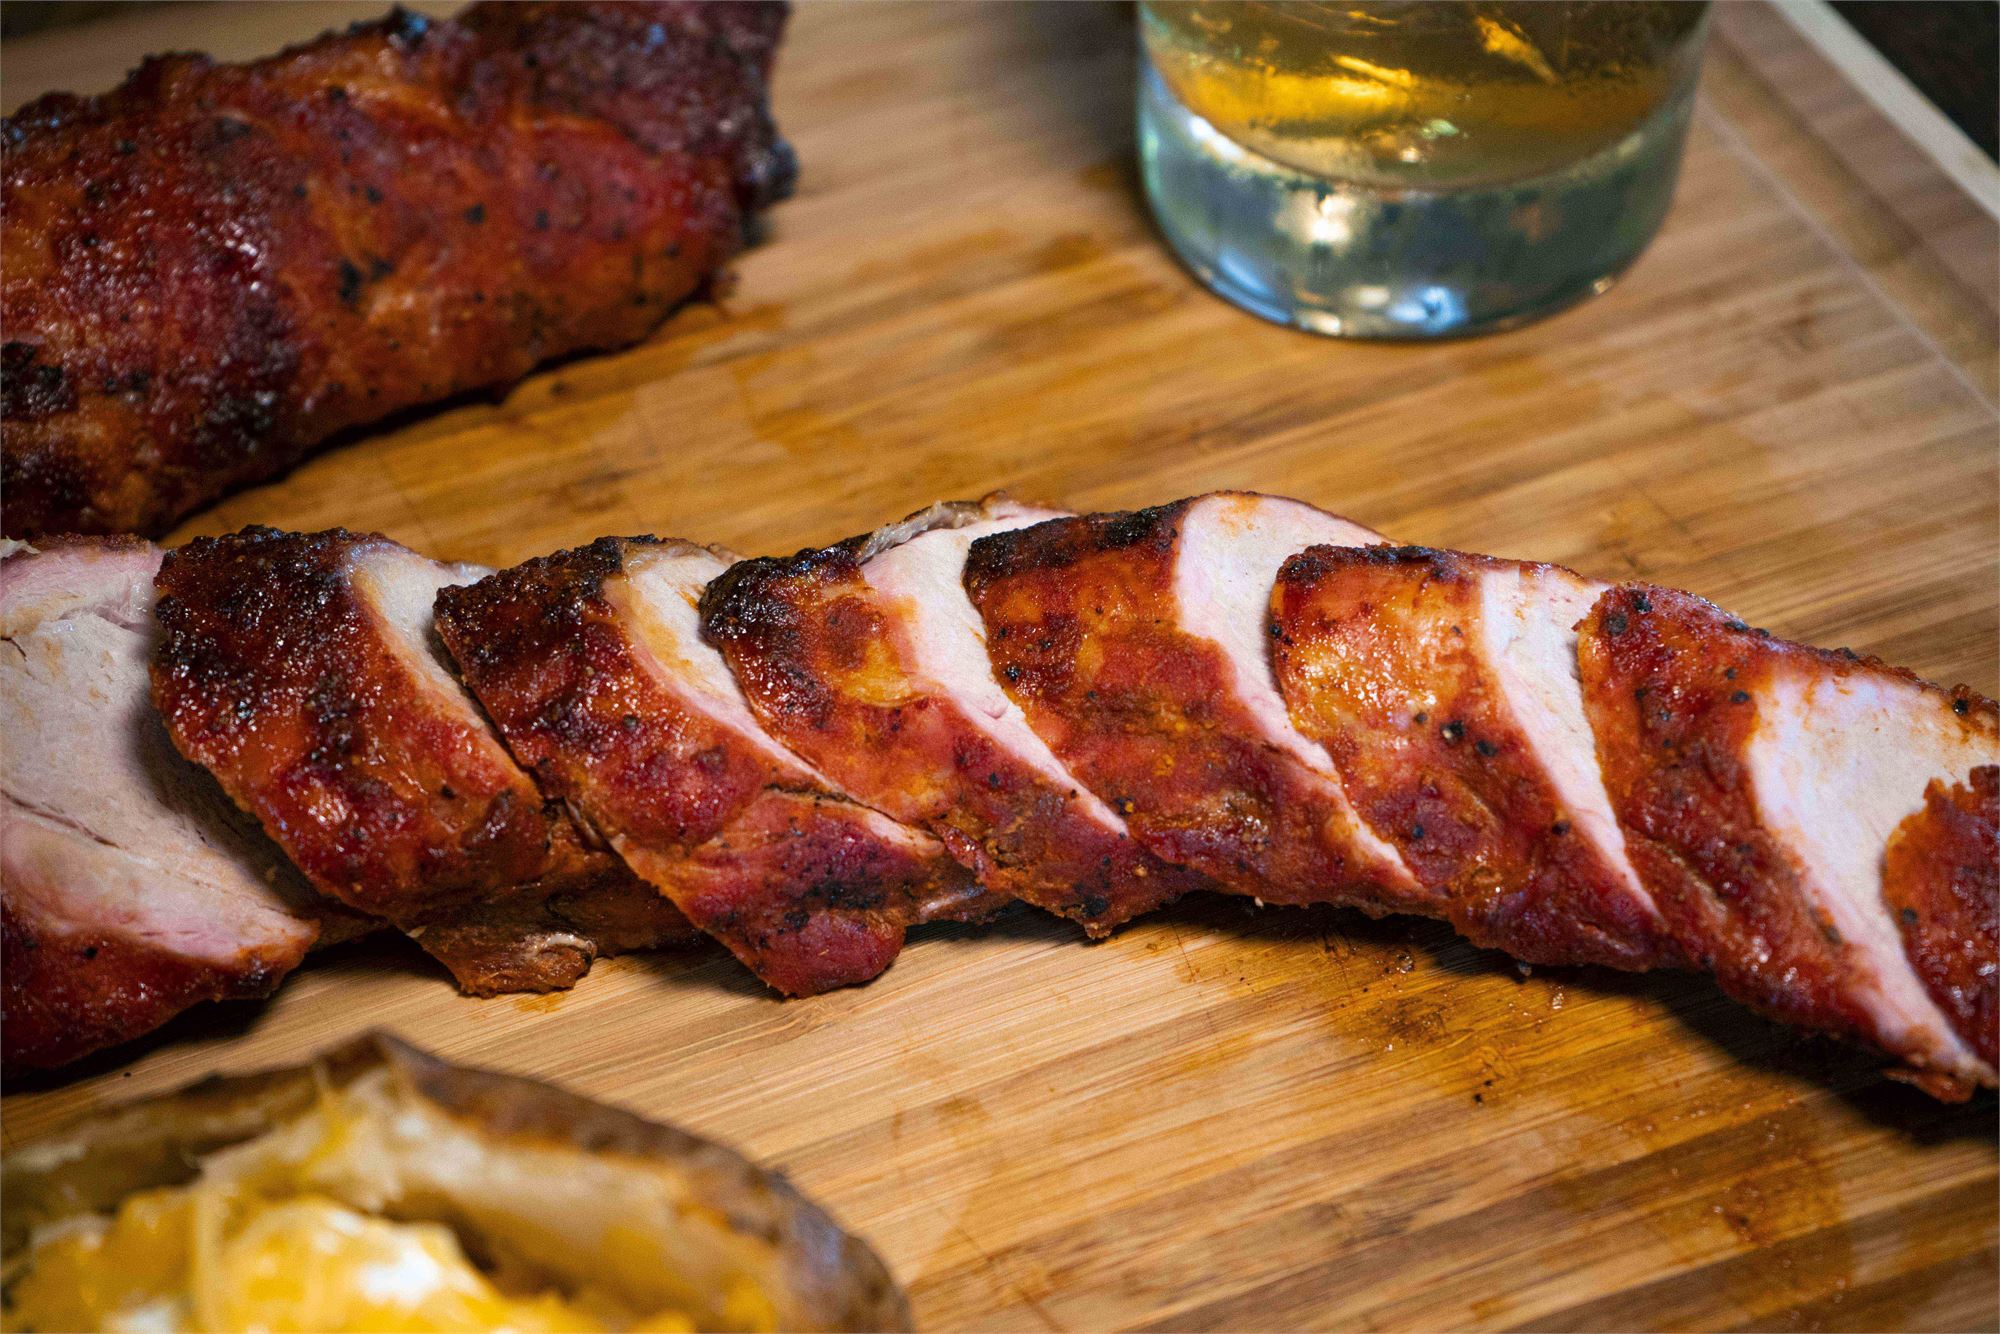 Sliced pork tenderloin laid out on a wooden cutting board with a glass of whiskey